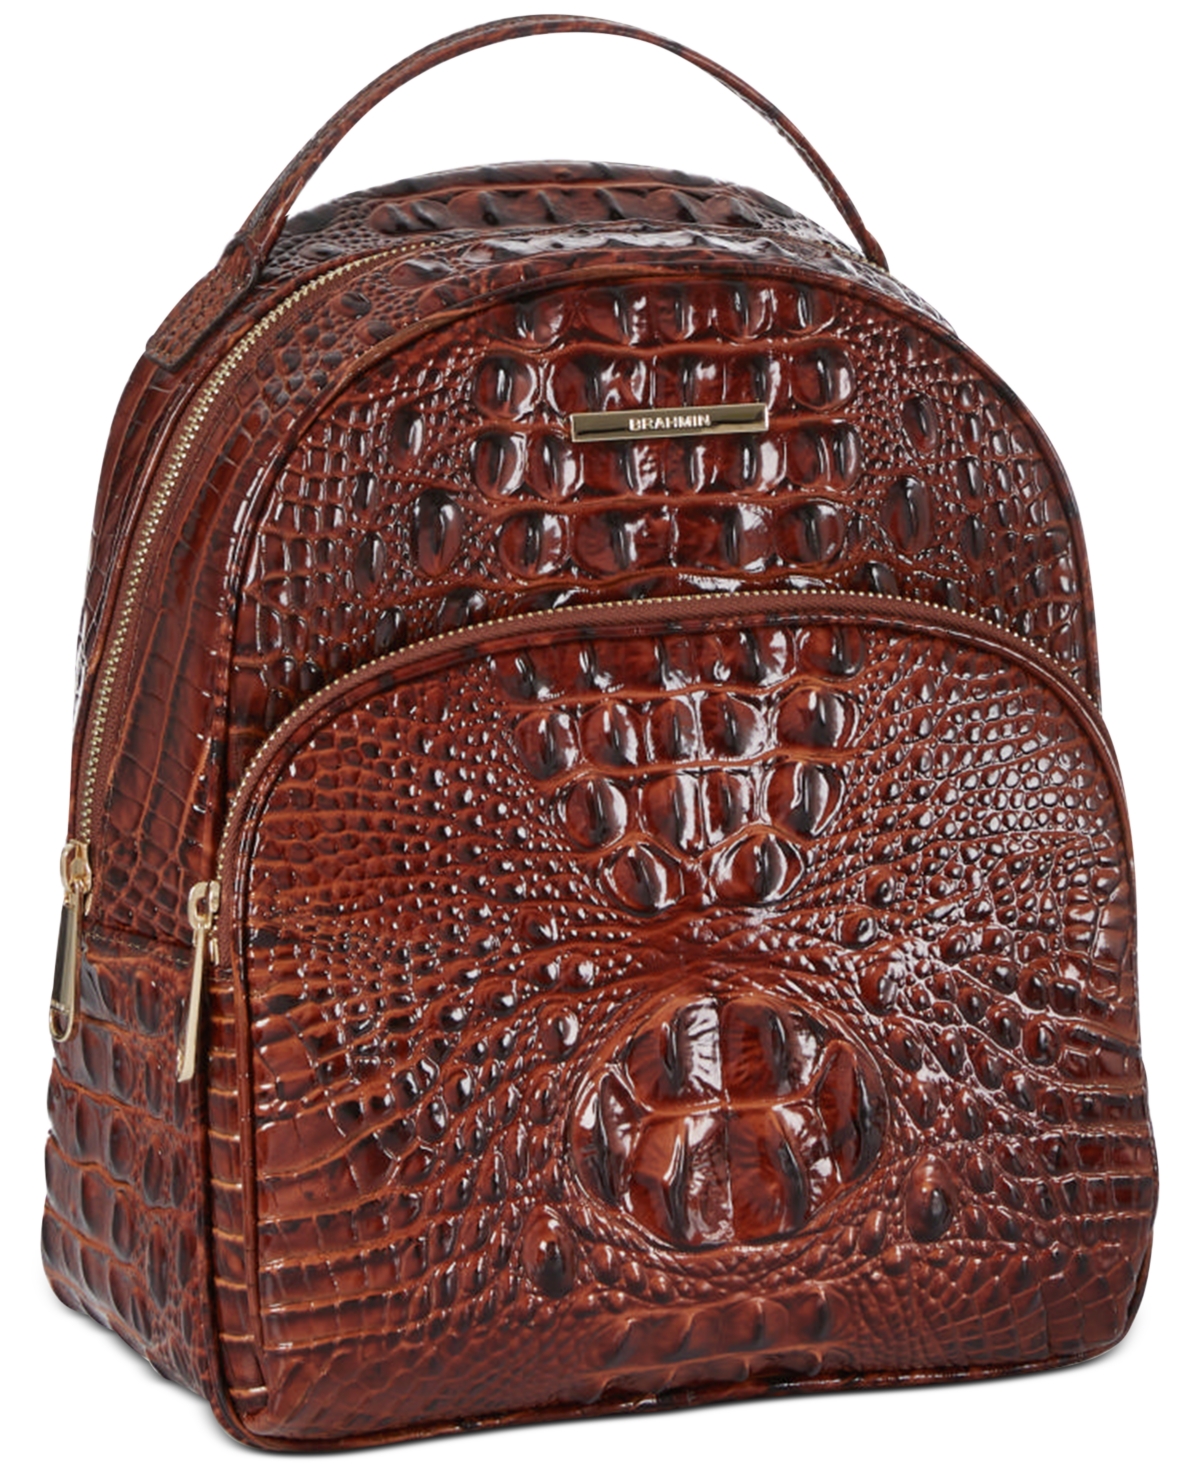 Chelcy Melbourne Embossed Leather Backpack - Pecan Melbourne